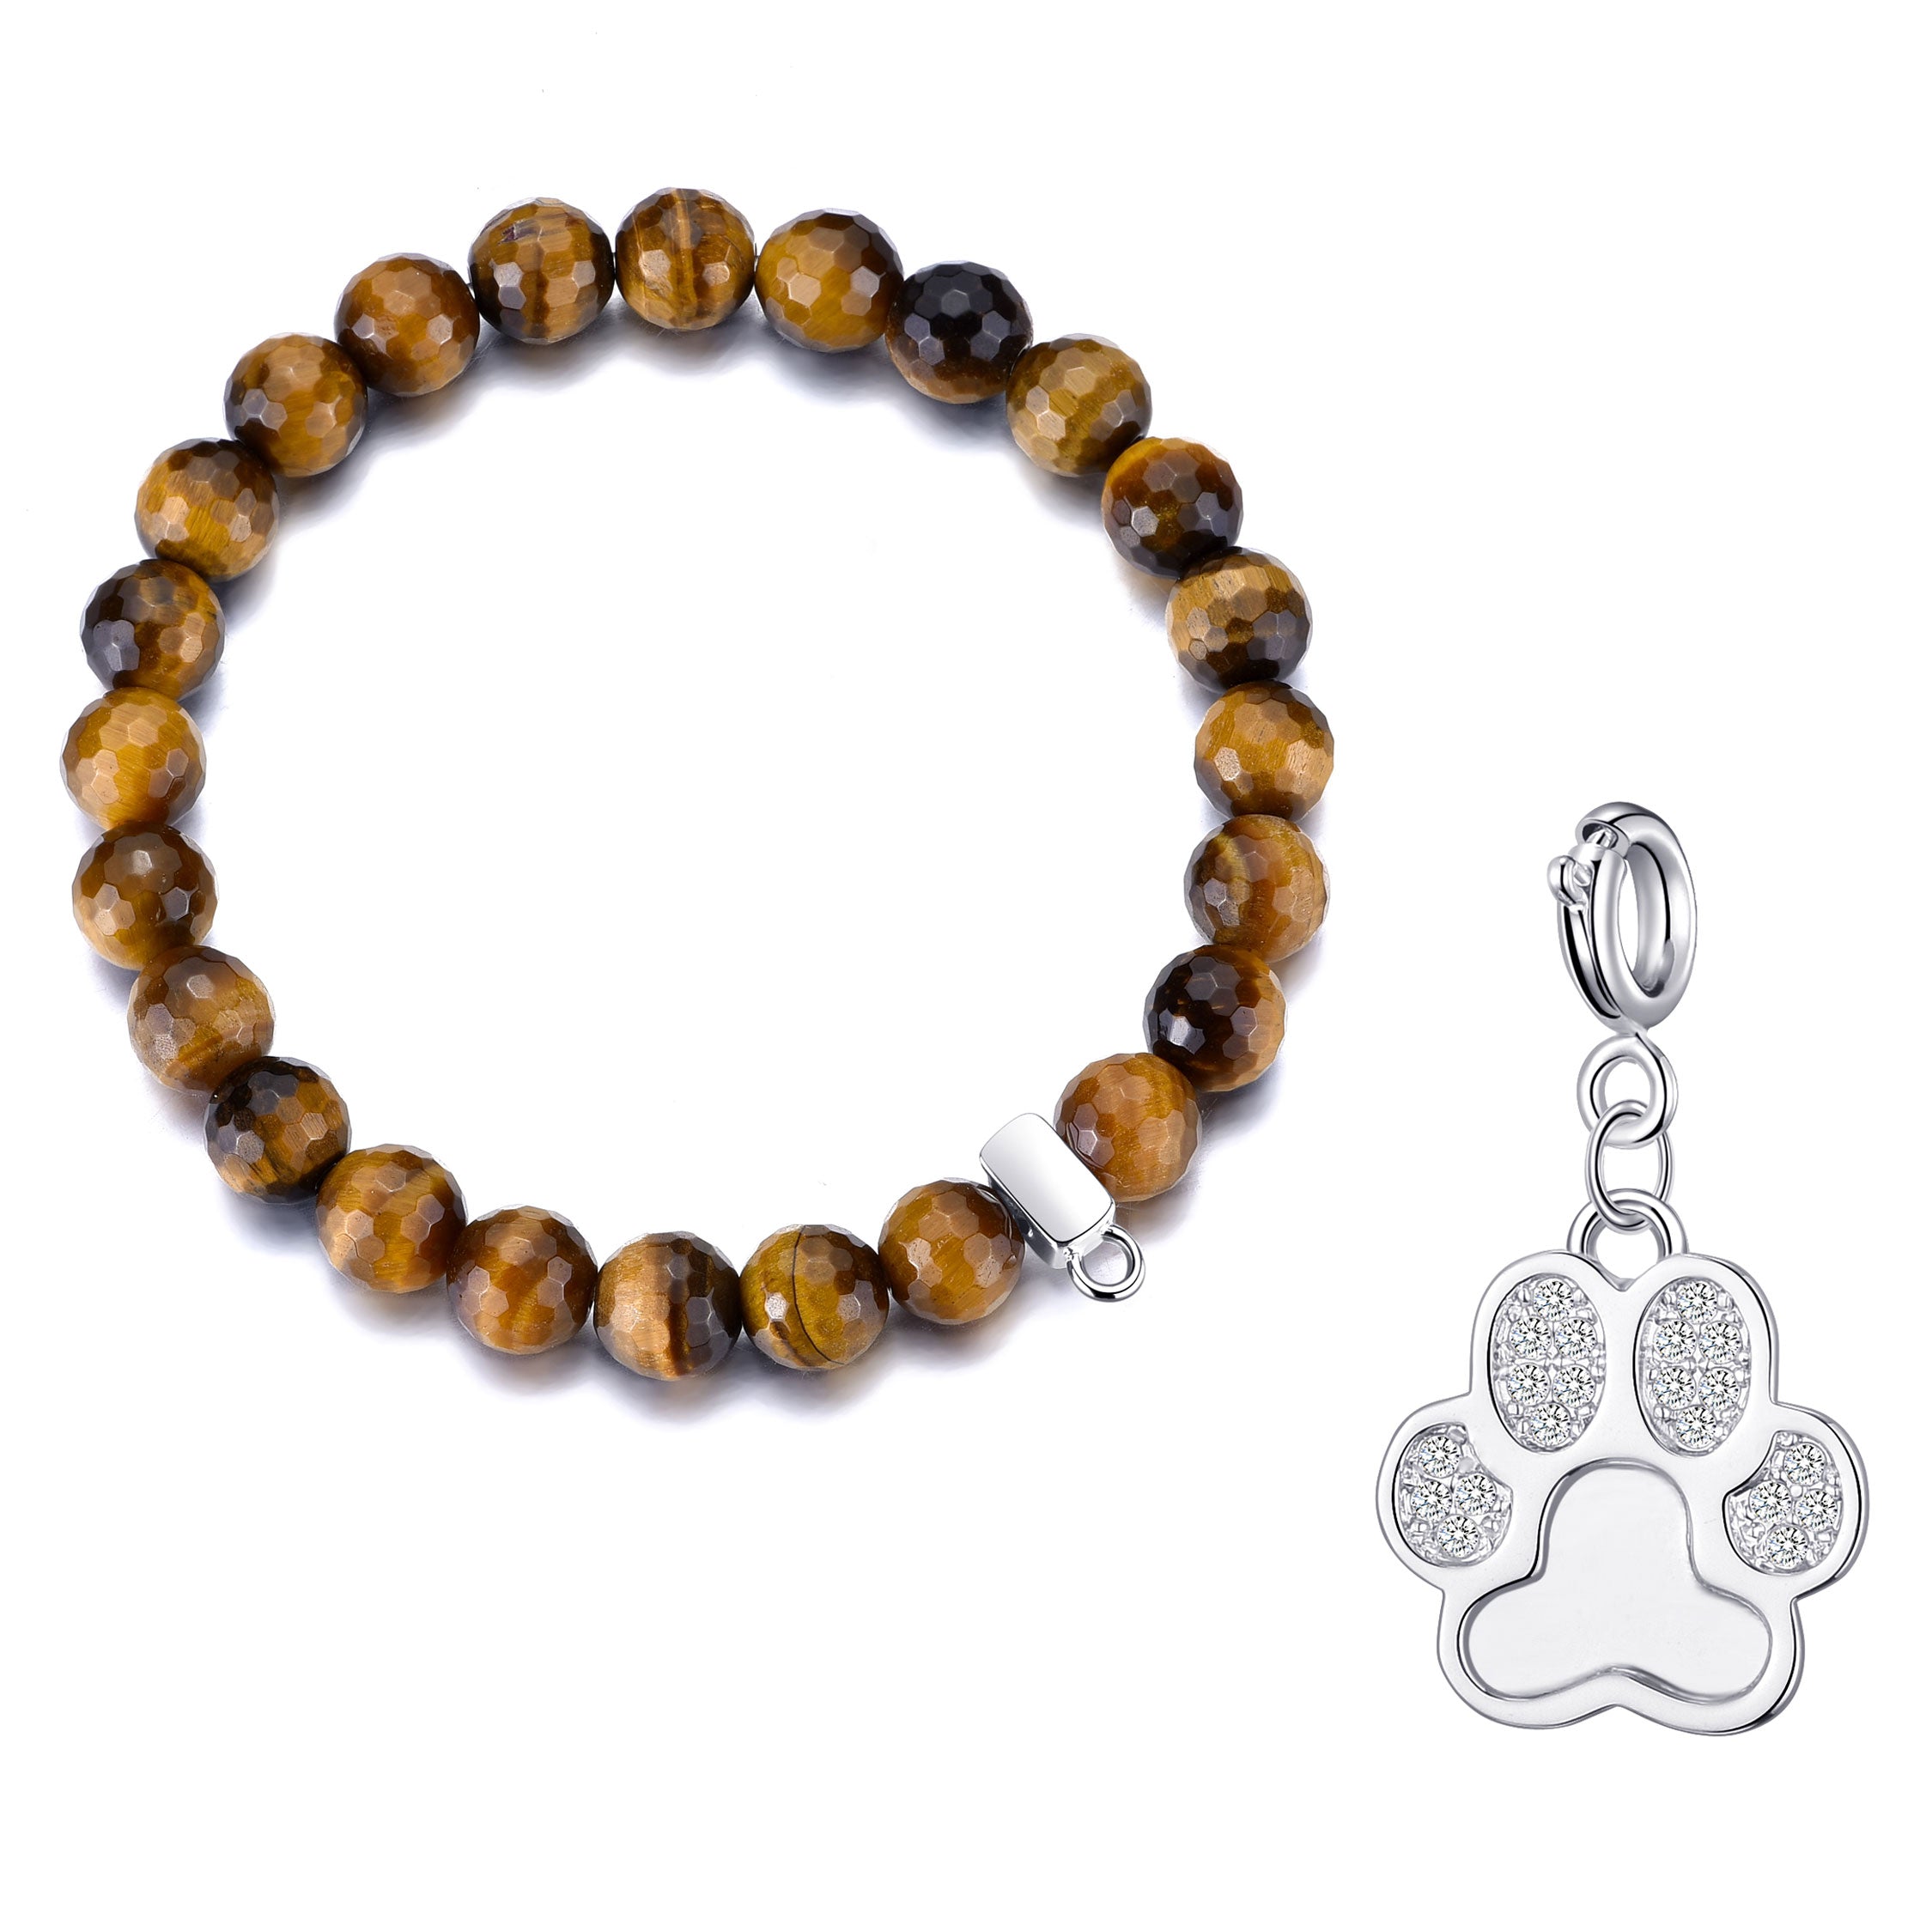 Faceted Tiger's Eye Gemstone Stretch Bracelet with Charm Created with Zircondia® Crystals